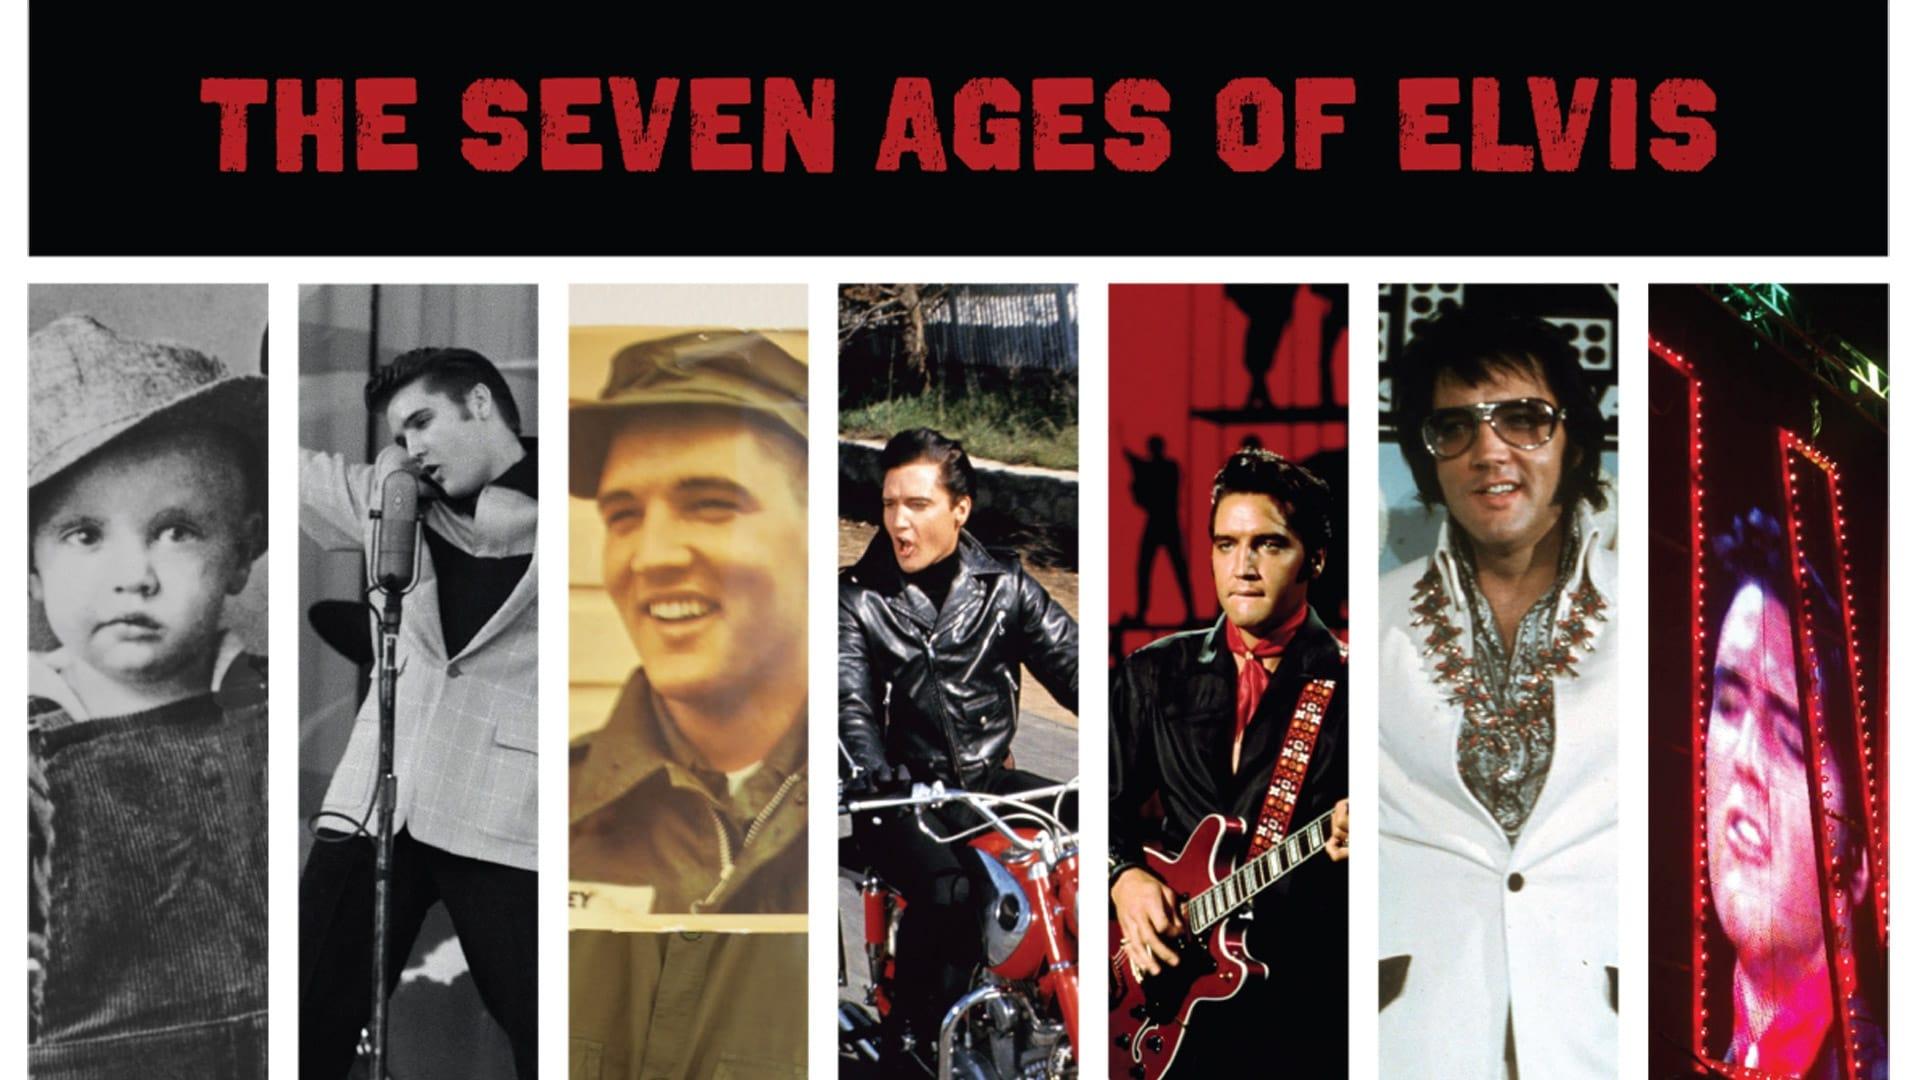 The Seven Ages of Elvis backdrop